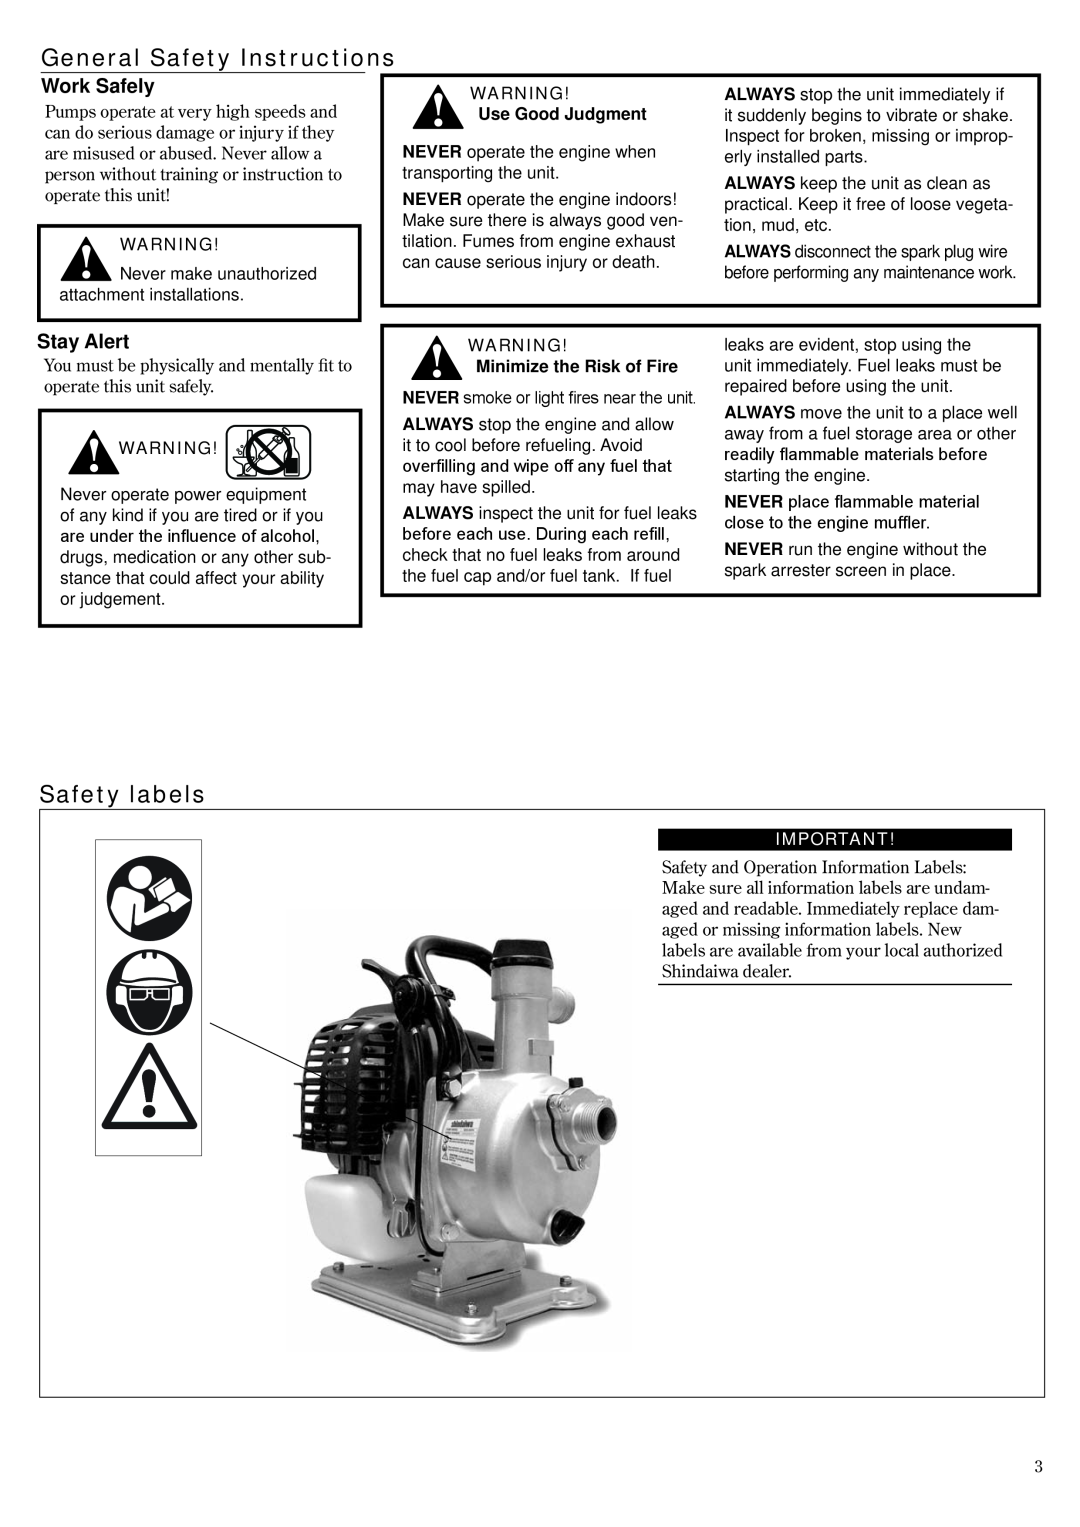 Shindaiwa GP3410, 6850-9430 manual General Safety Instructions, Safety labels, Work Safely, Stay Alert, Use Good Judgment 